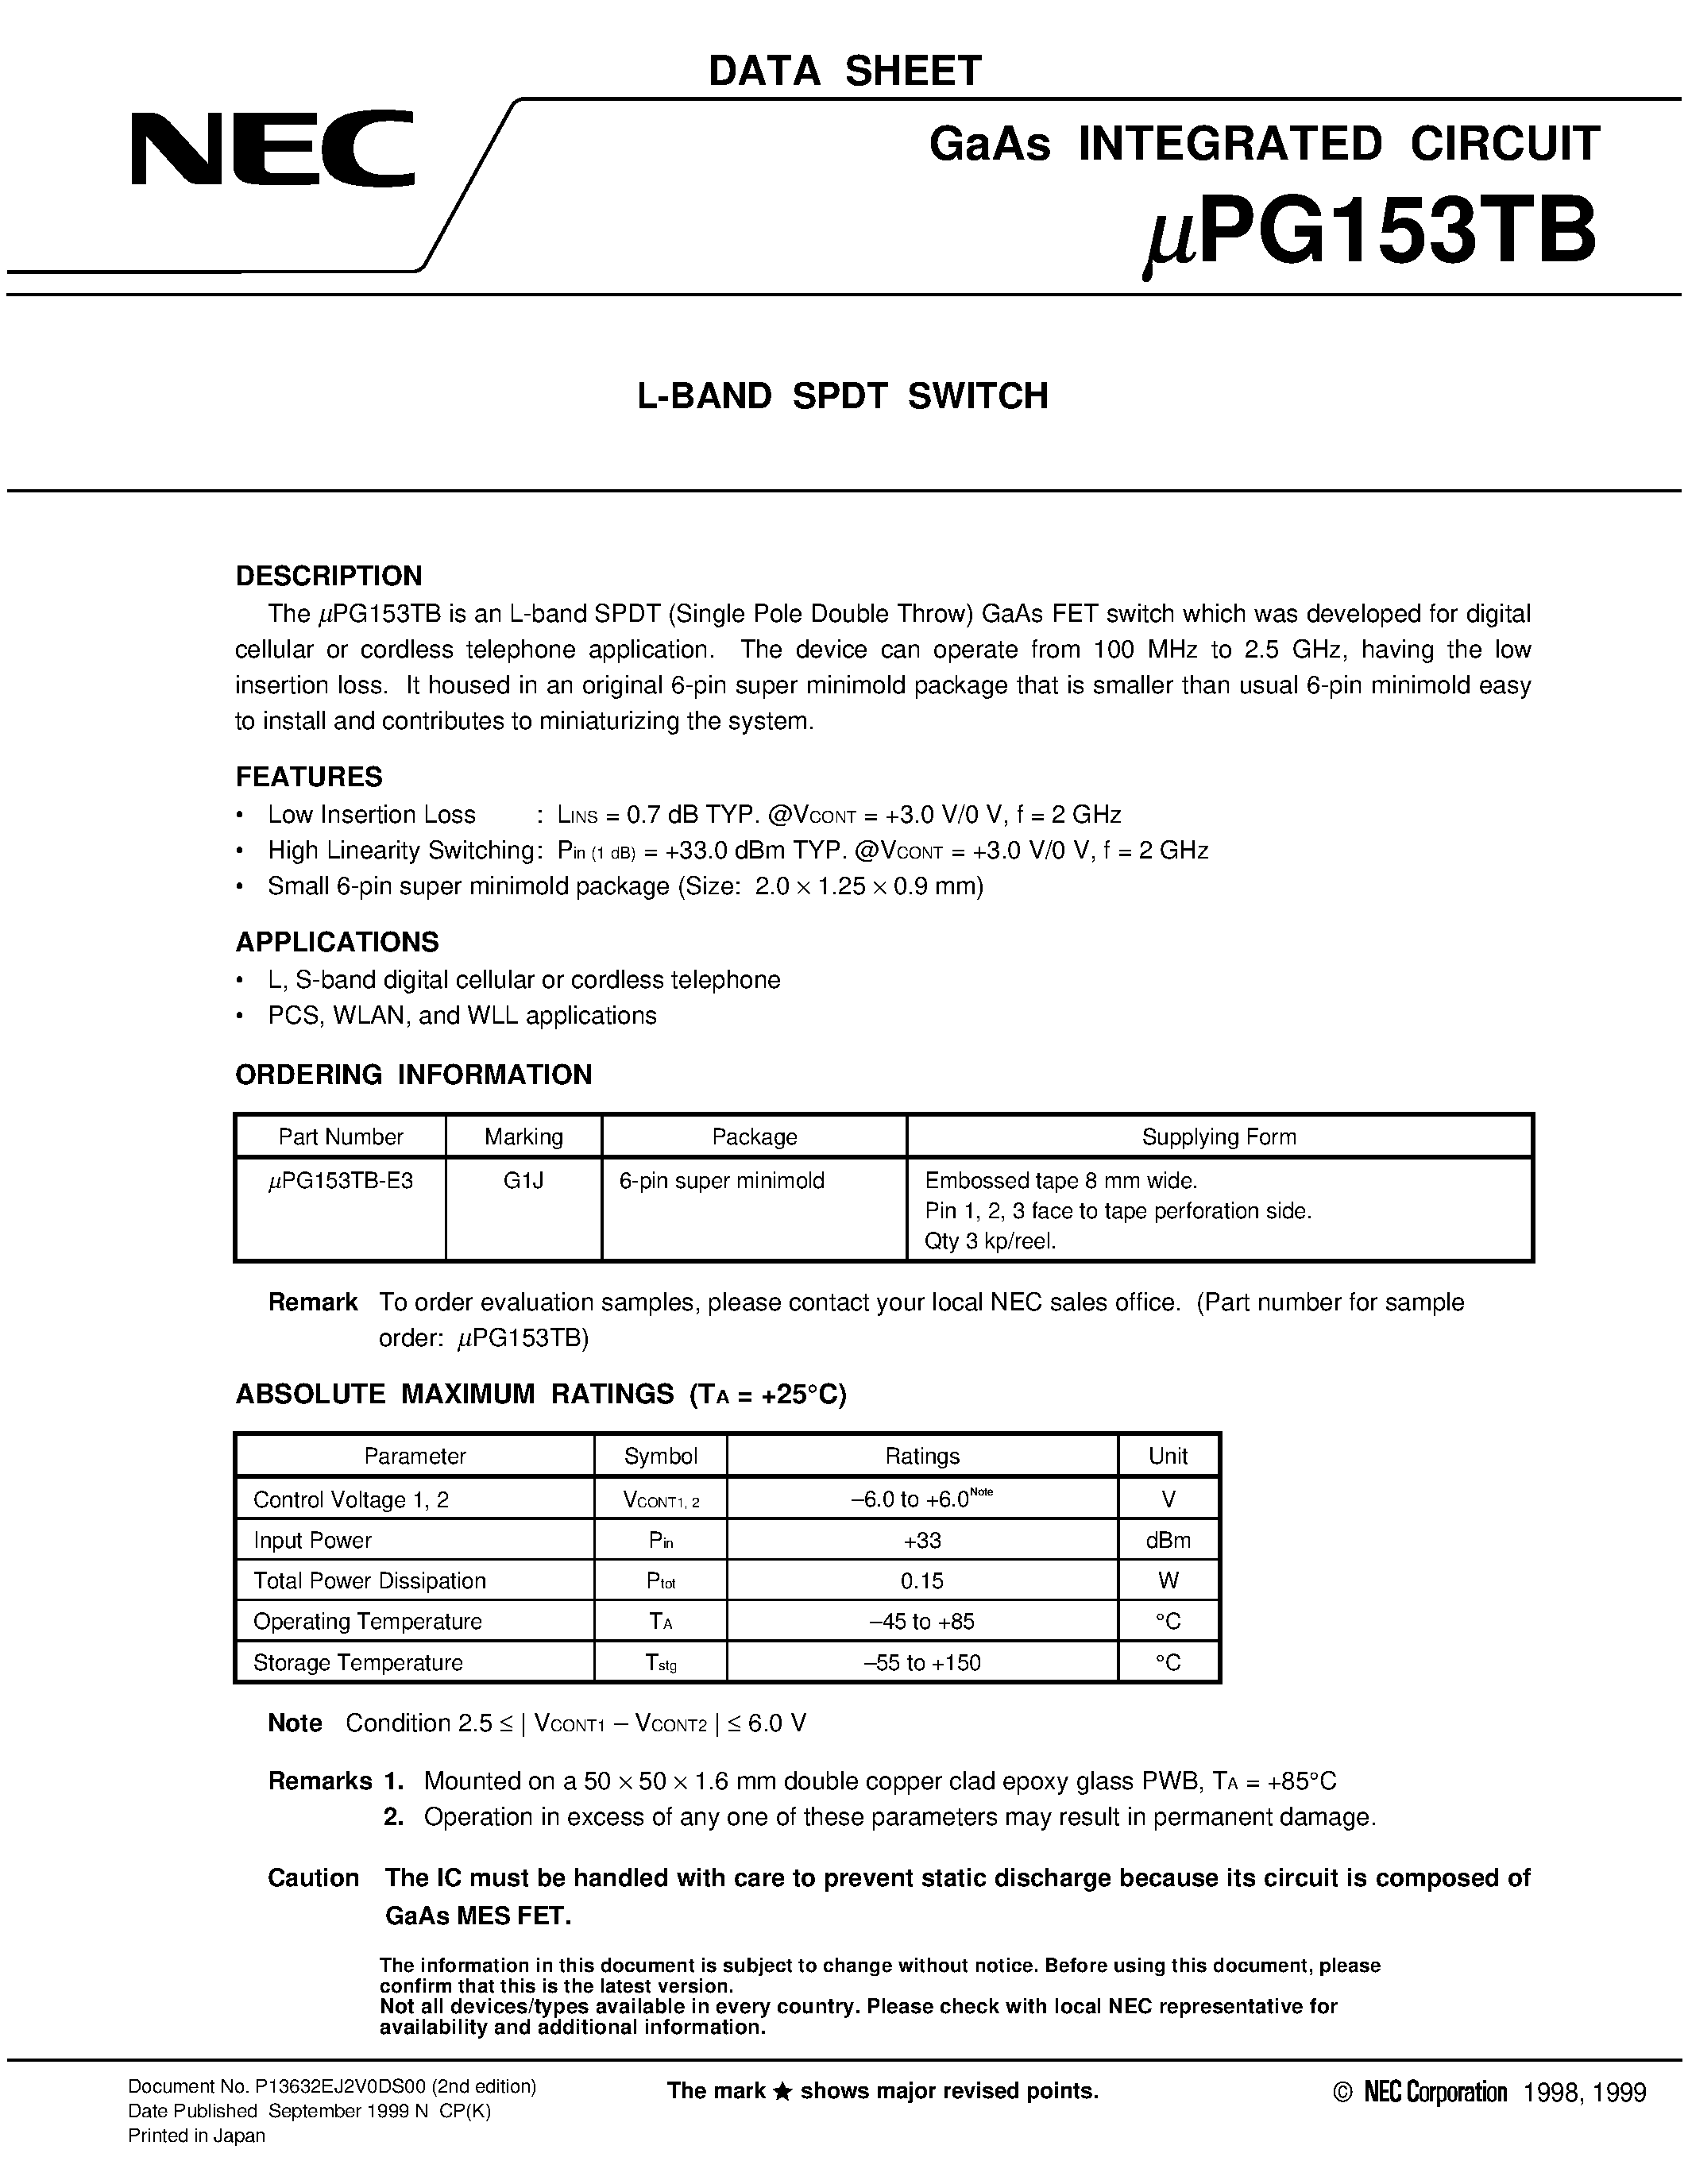 Datasheet UPG153TB - L-BAND SPDT SWITCH page 1